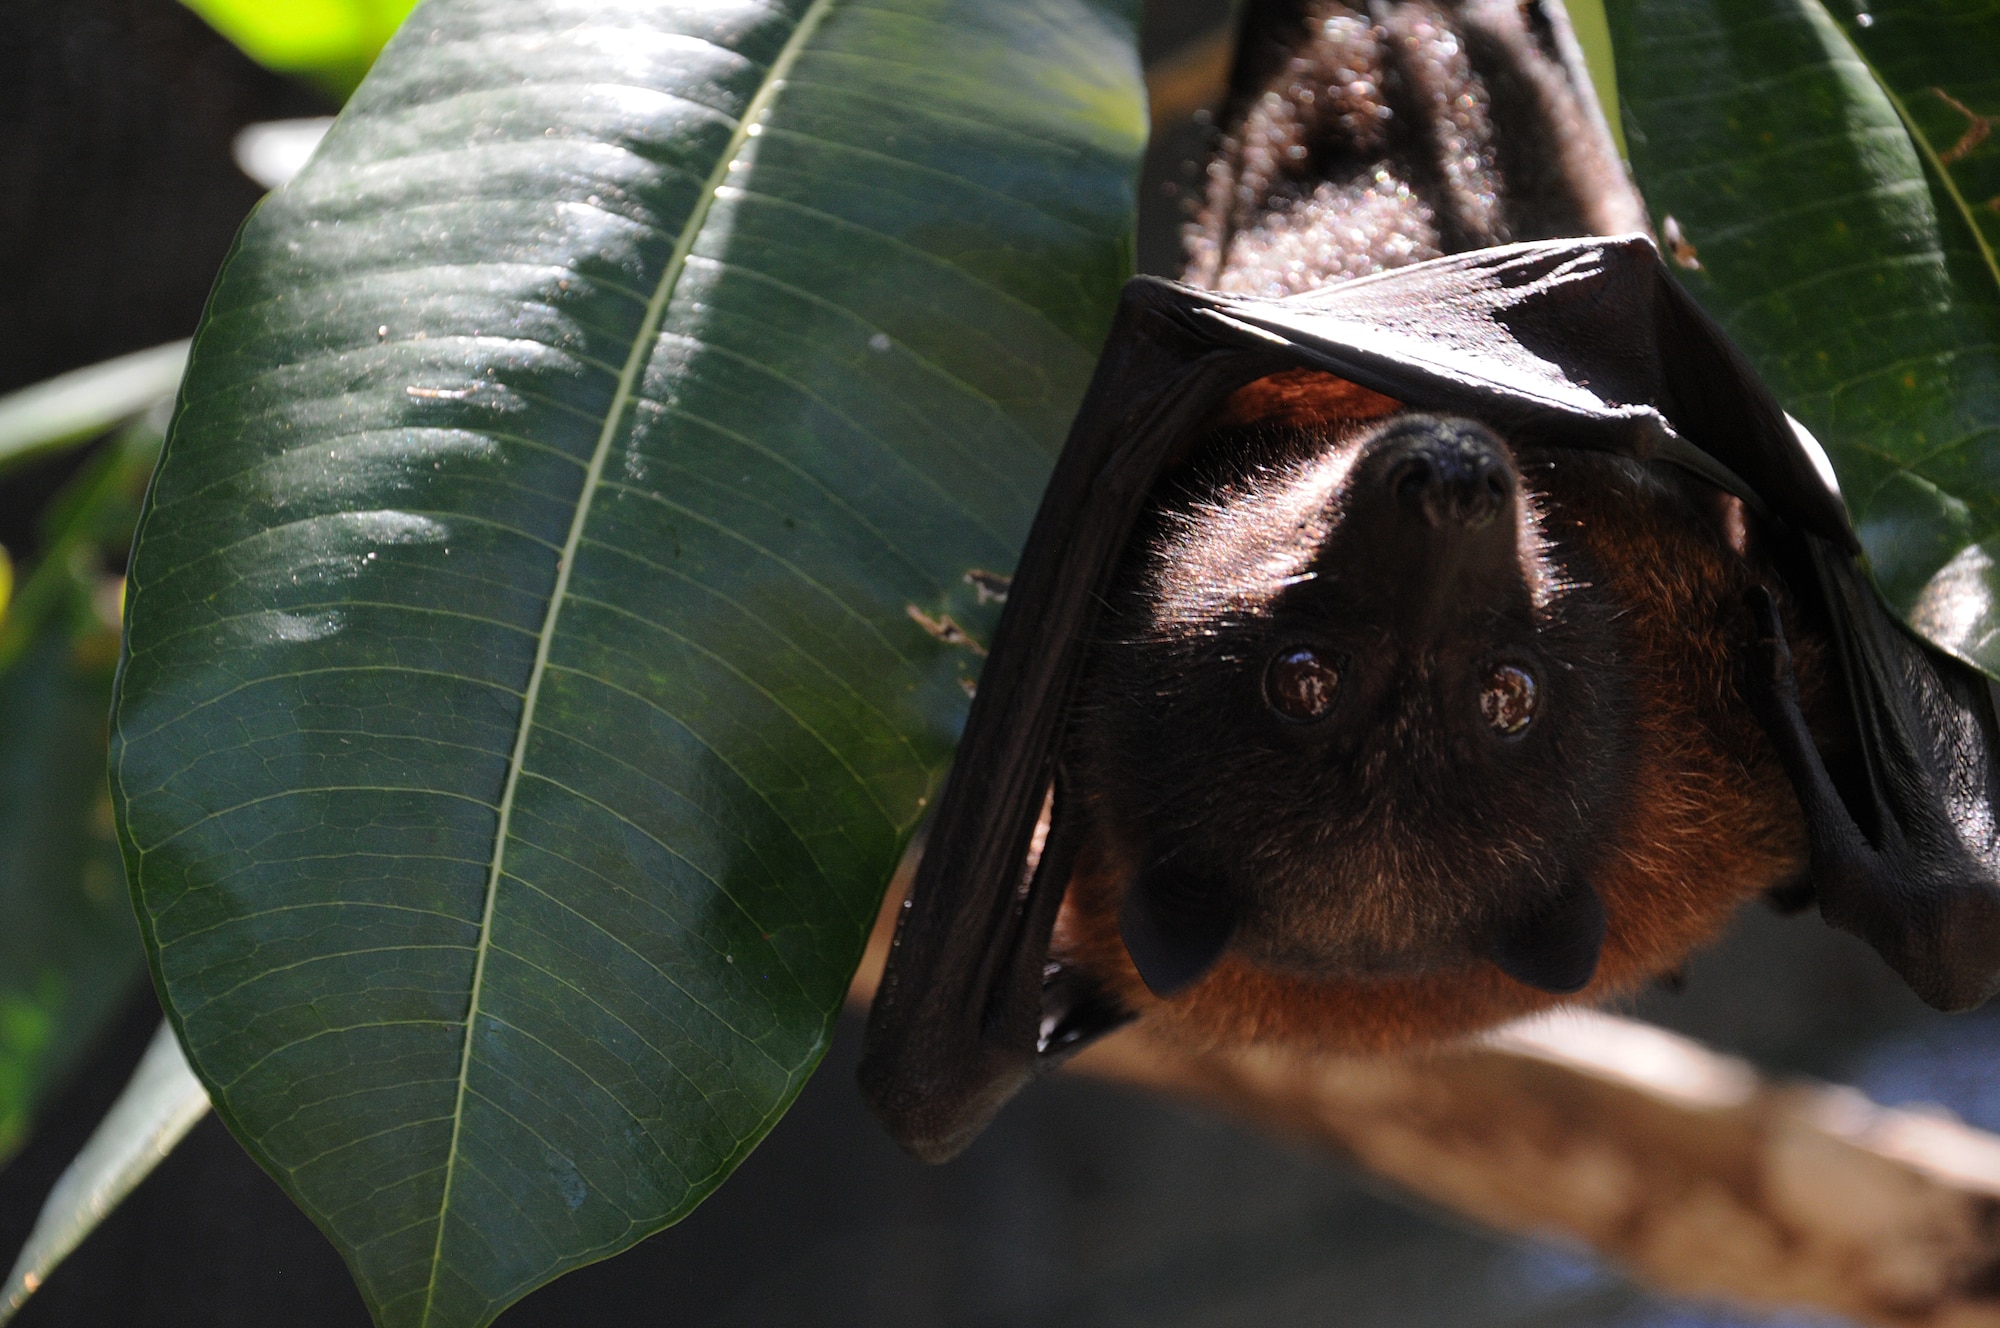 A Mariana fruit bat named Babydoll hangs from a tree at the Guam National Wildlife Refuge on Ritidian Point, Guam, May 20, 2013. The Mariana fruit bat, which dwells on Guam and the Commonwealth of the Northern Mariana Islands, is currently listed as a threatened species, though it has fluctuated between endangered and threatened in the past. (U.S. Air Force photo by Staff Sgt. Melissa B. White/Released)